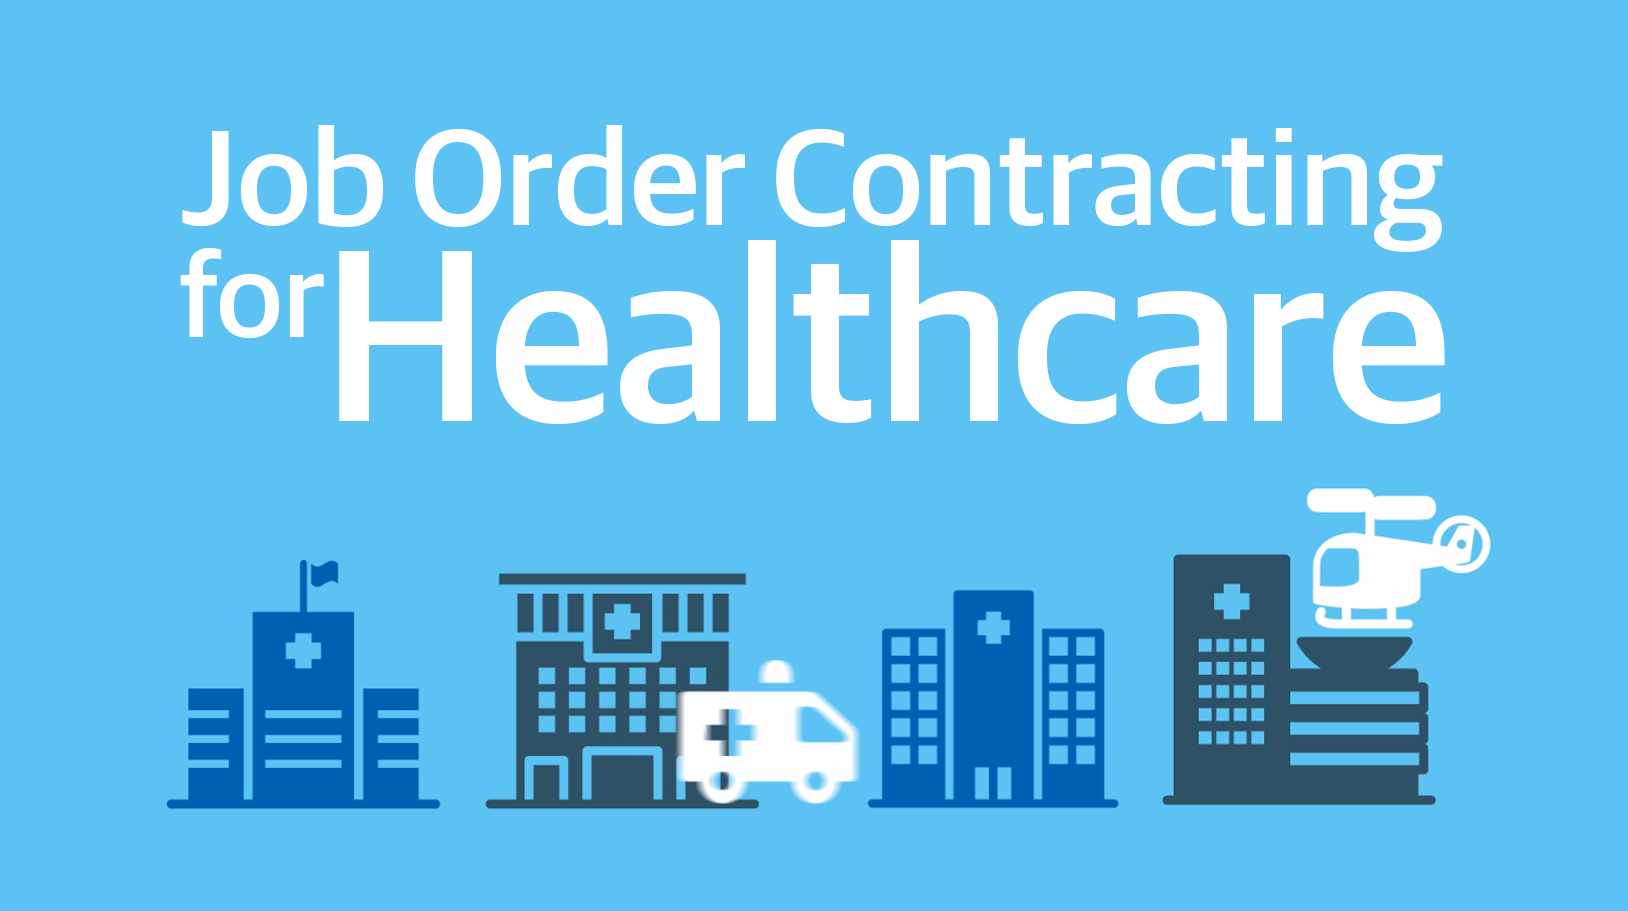 Benefits of Job Order Contracting for Healthcare